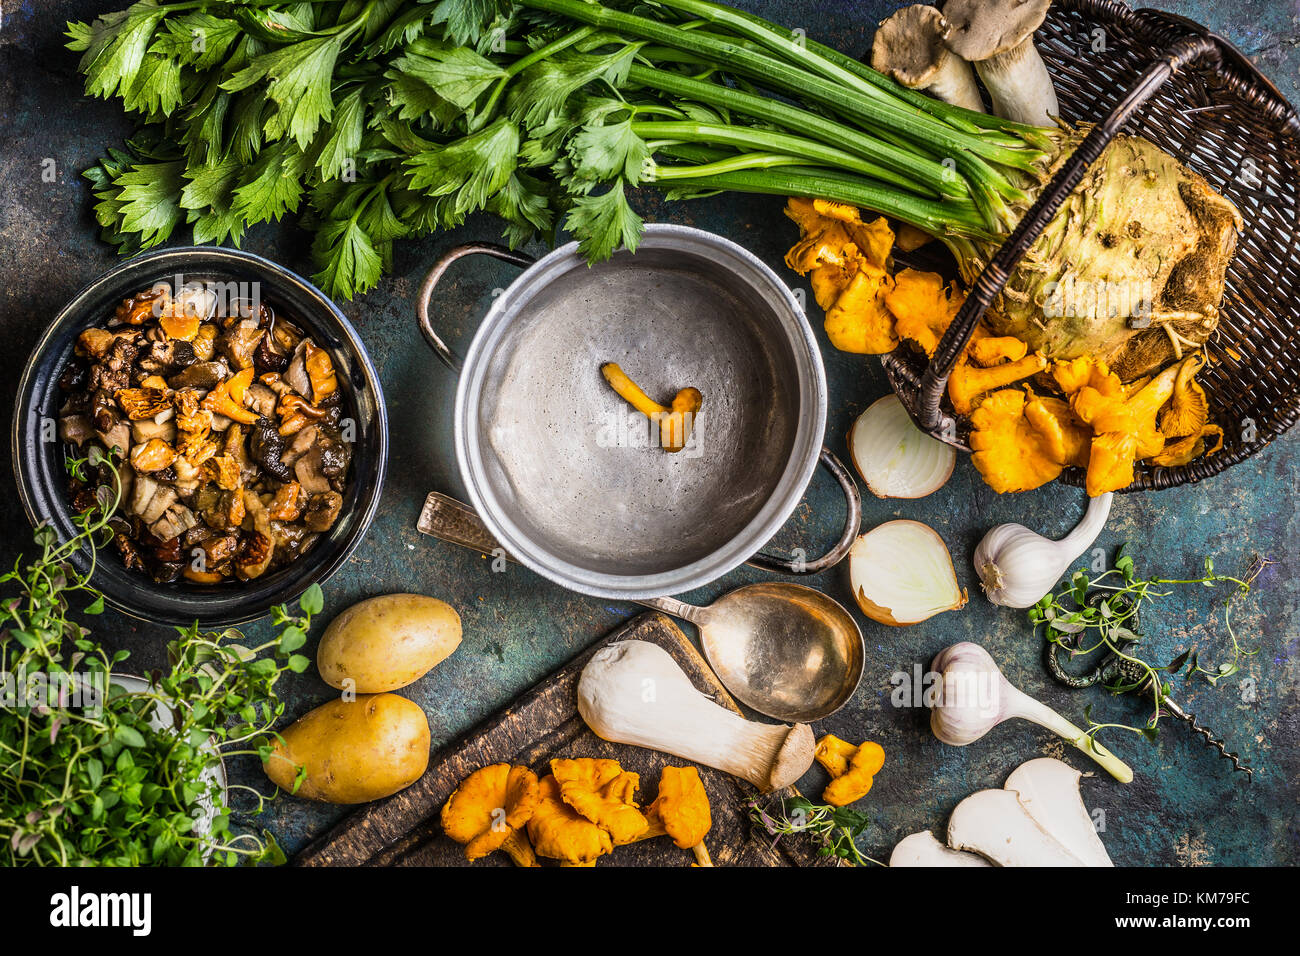 Forest Mushrooms cooking preparation on rustic kitchen table with empty cooking pot and vegetables, top view. Autumn cooking concept Stock Photo